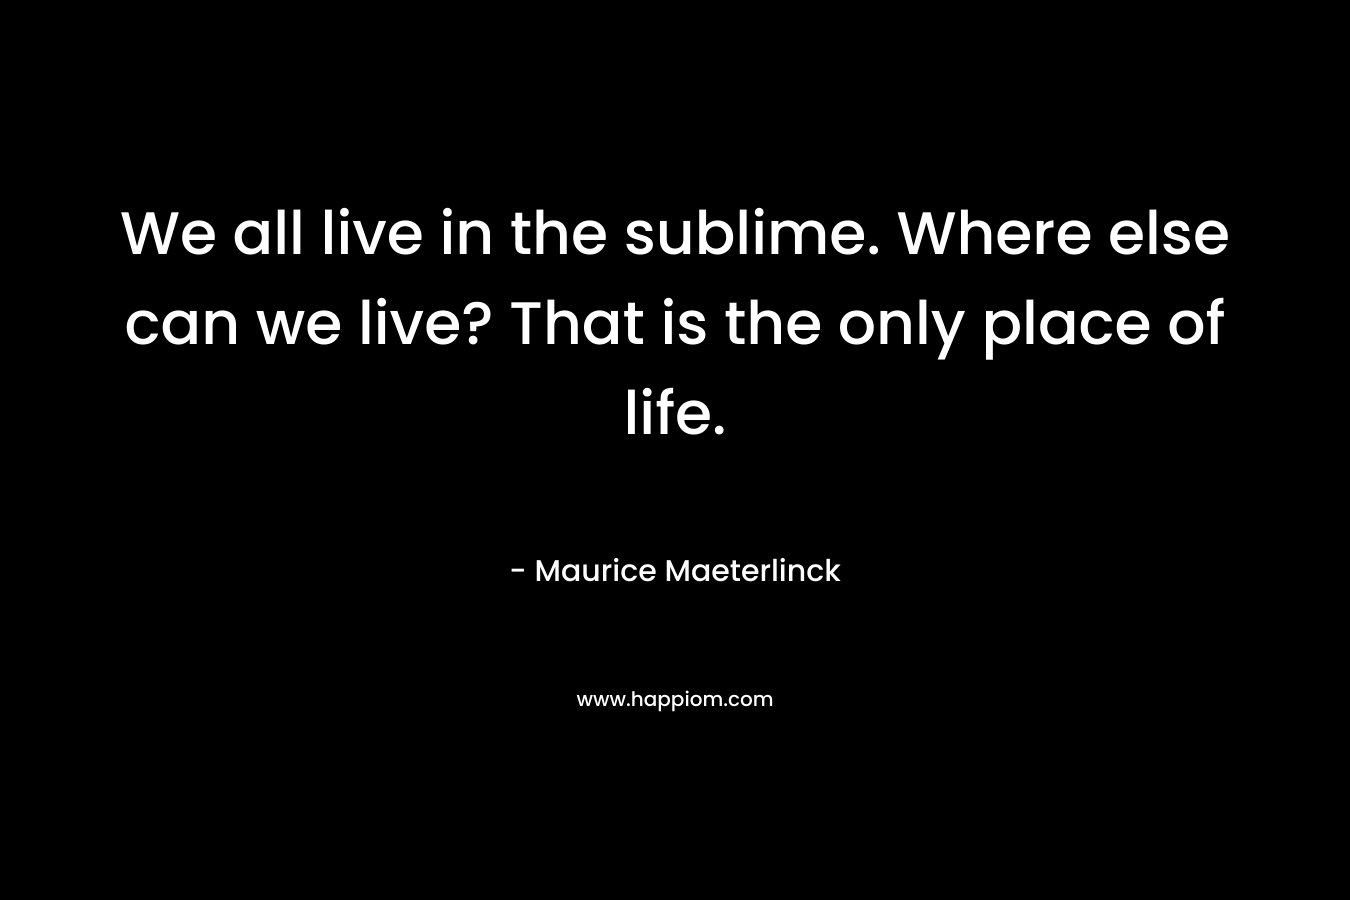 We all live in the sublime. Where else can we live? That is the only place of life. – Maurice Maeterlinck